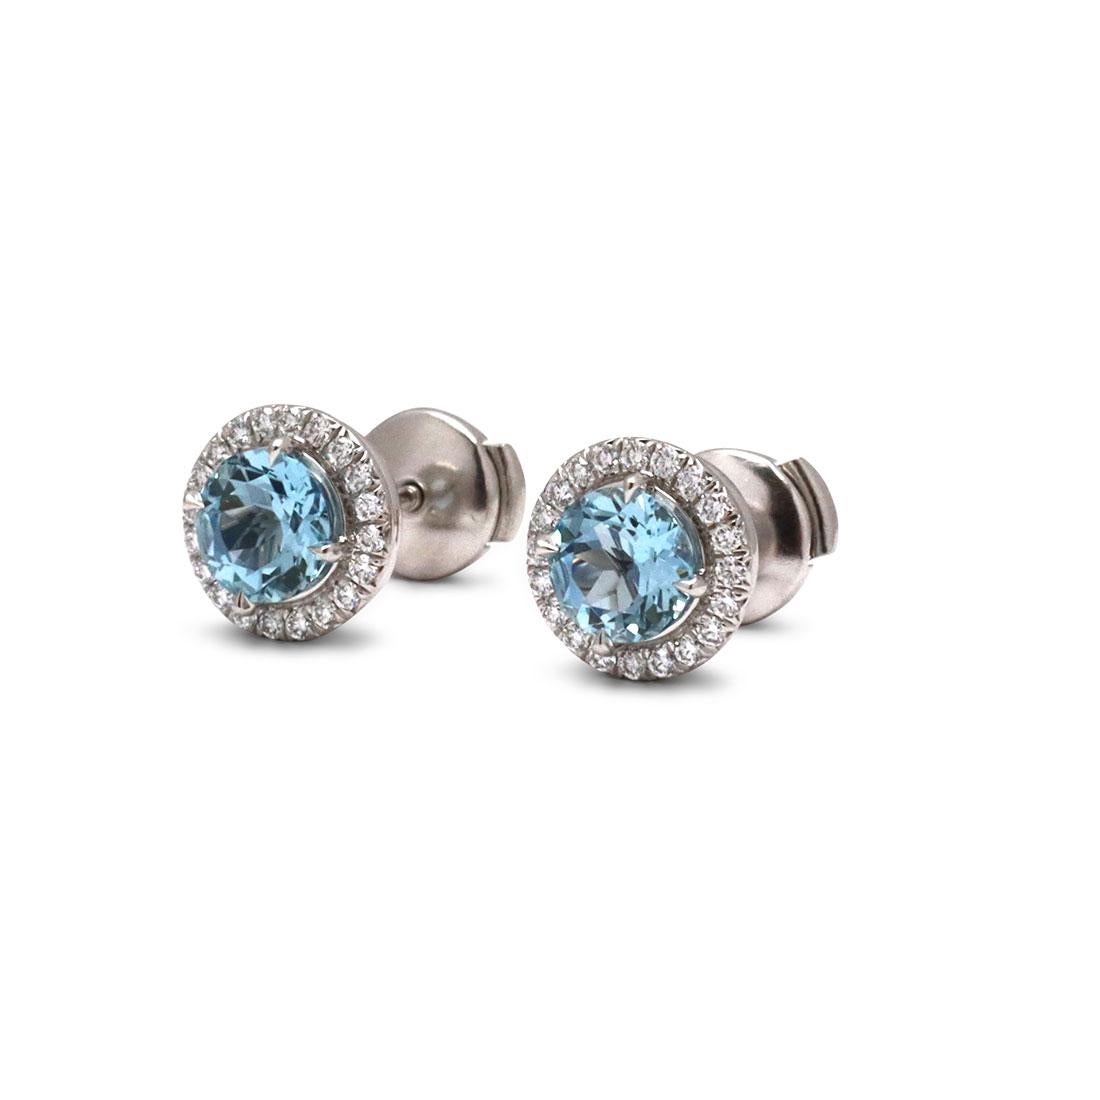 Authentic Tiffany & Co. 'Soleste' earrings each center on a 6mm round aquamarine stone (approx. 1.40cttw) surrounded by high quality round brilliant cut diamonds (approx .40cttw). Signed Tiffany & Co., PT950. The earrings are not presented with